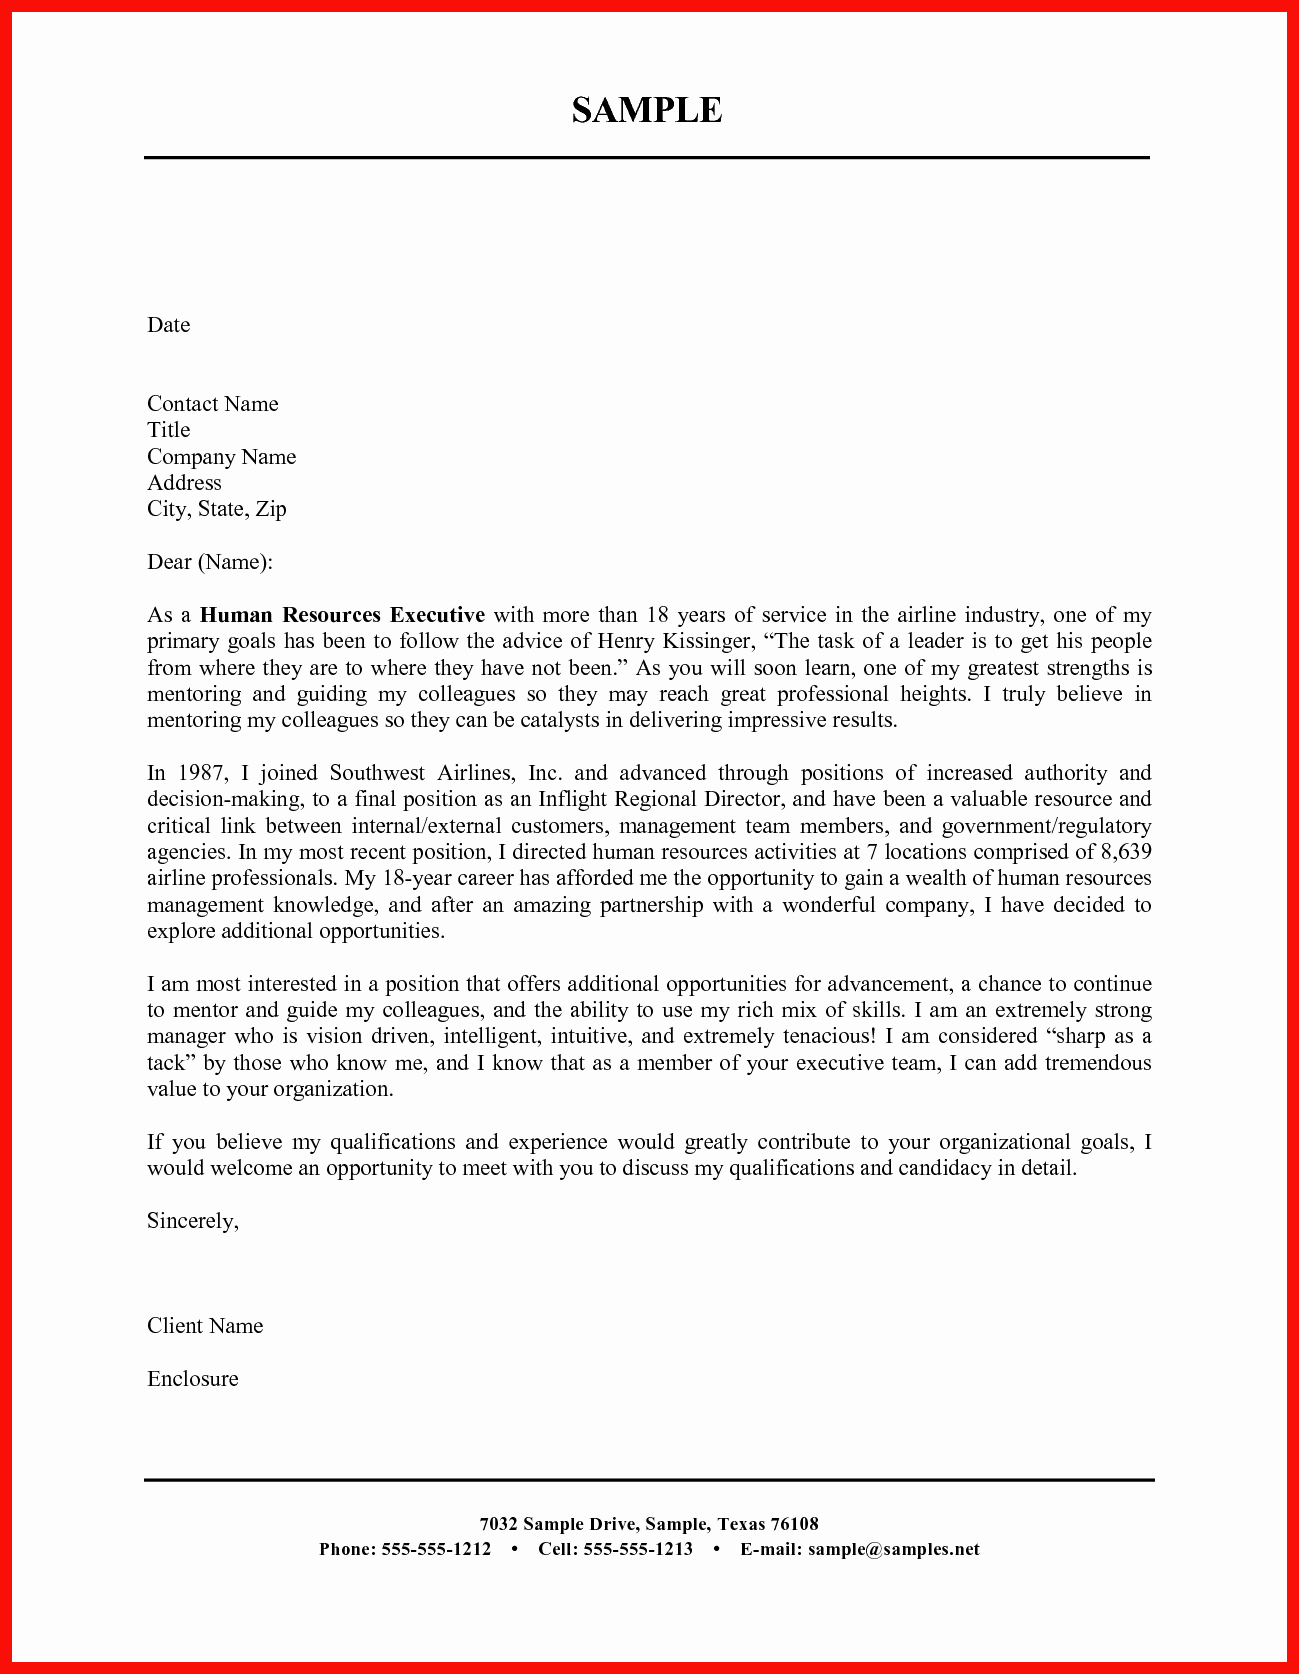 Word Template Cover Letter